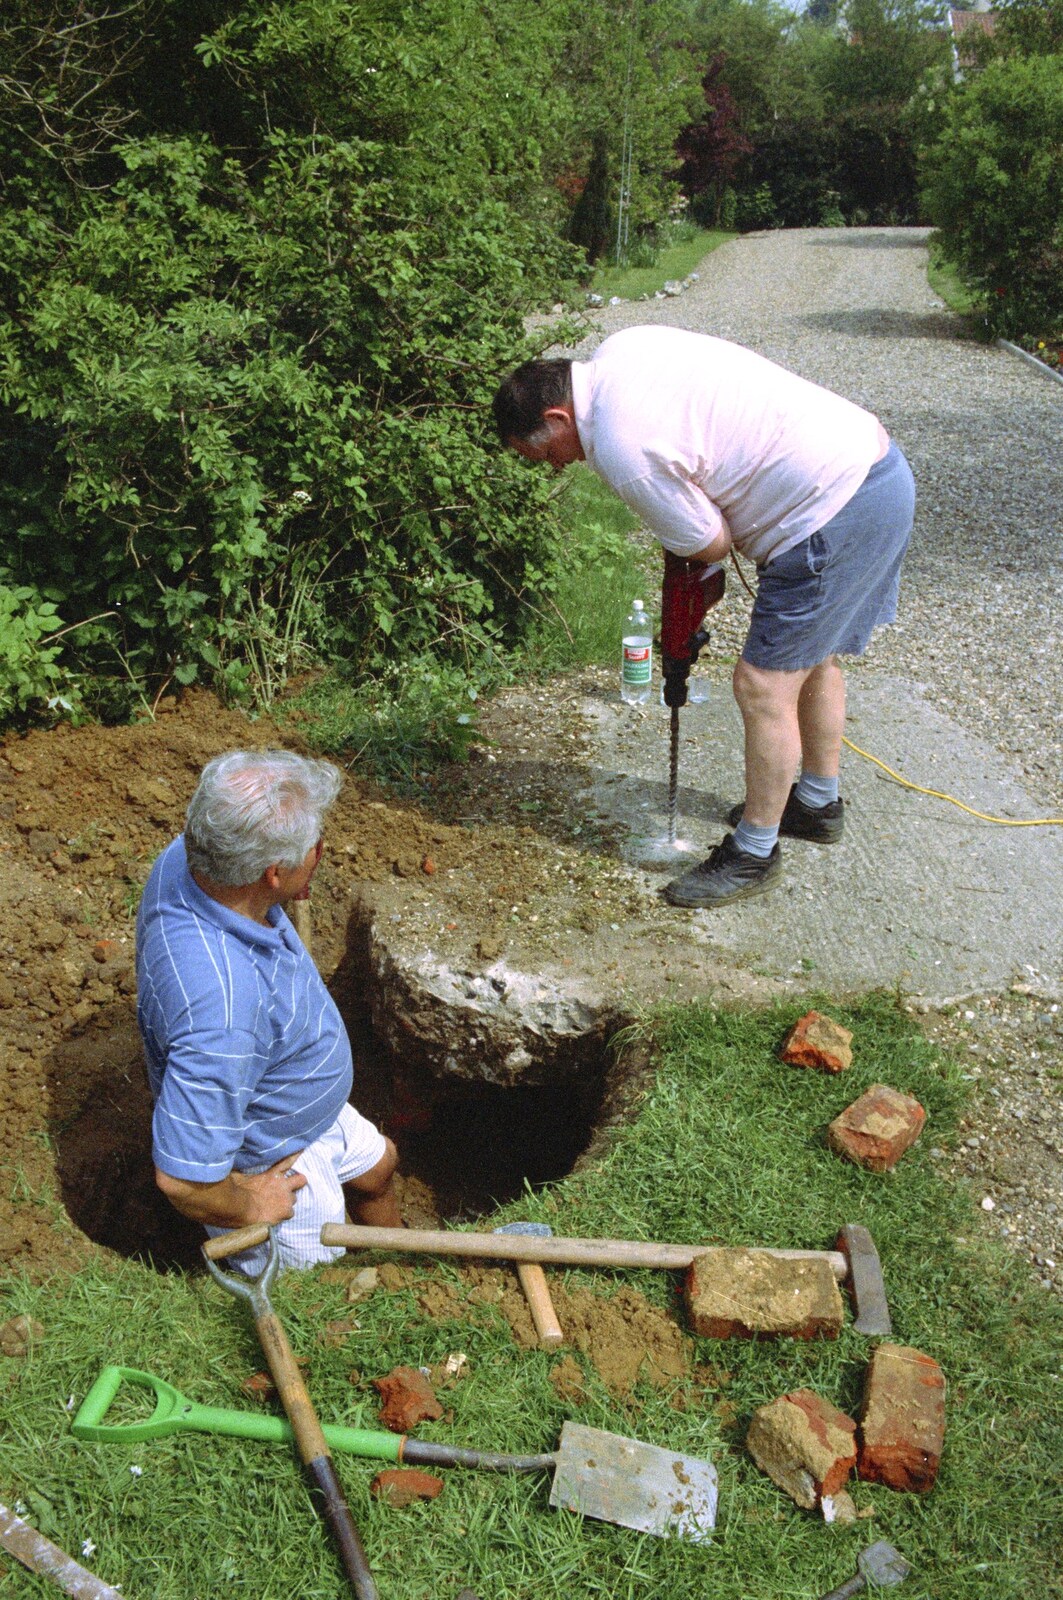 Danny Flint drills a hole in the well cap from Hale-Bopp and Bedroom Demolition, Brome, Suffolk - 10th May 1997